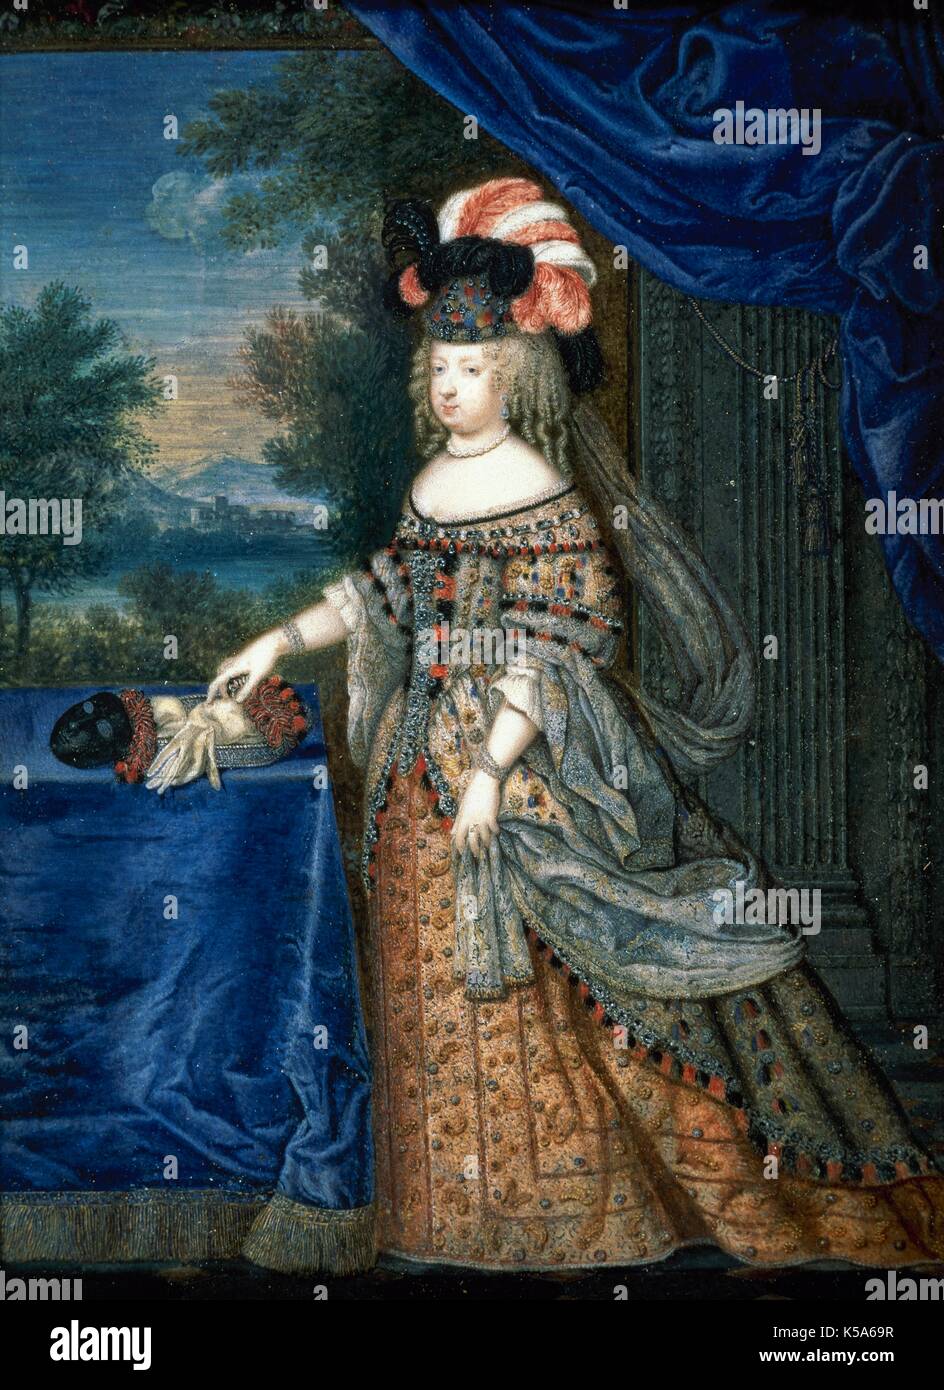 Maria Therese of Austria (1638-1683). Queen of France, Infanta of Spain and Portugal. Painting. Palace of Versailles. France. Stock Photo